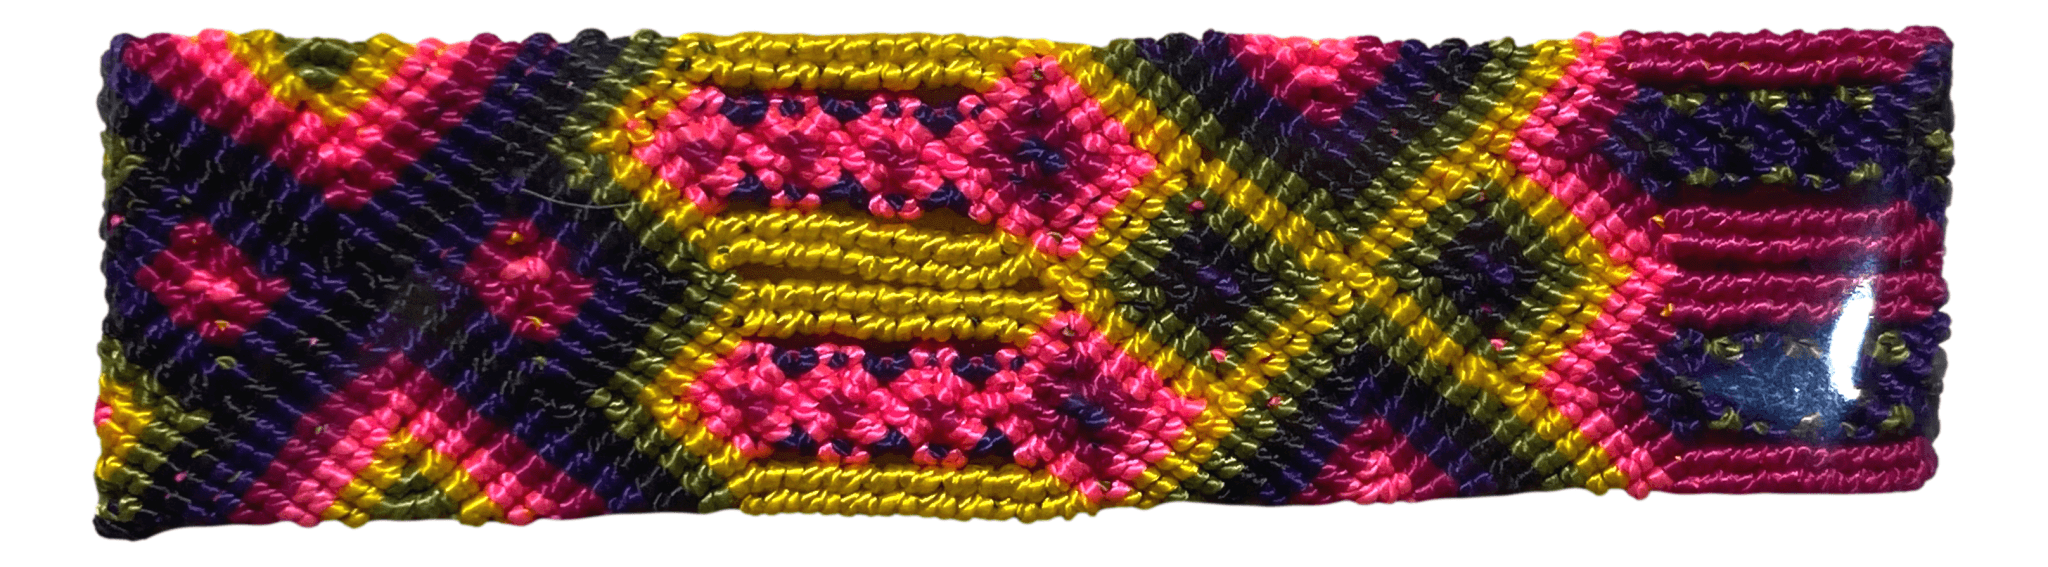 Bracelet Handwoven Various Colors Handcrafted by Local Artisan 1 Inch Wide - Ysleta Mission Gift Shop- VOTED El Paso's Best Gift Shop